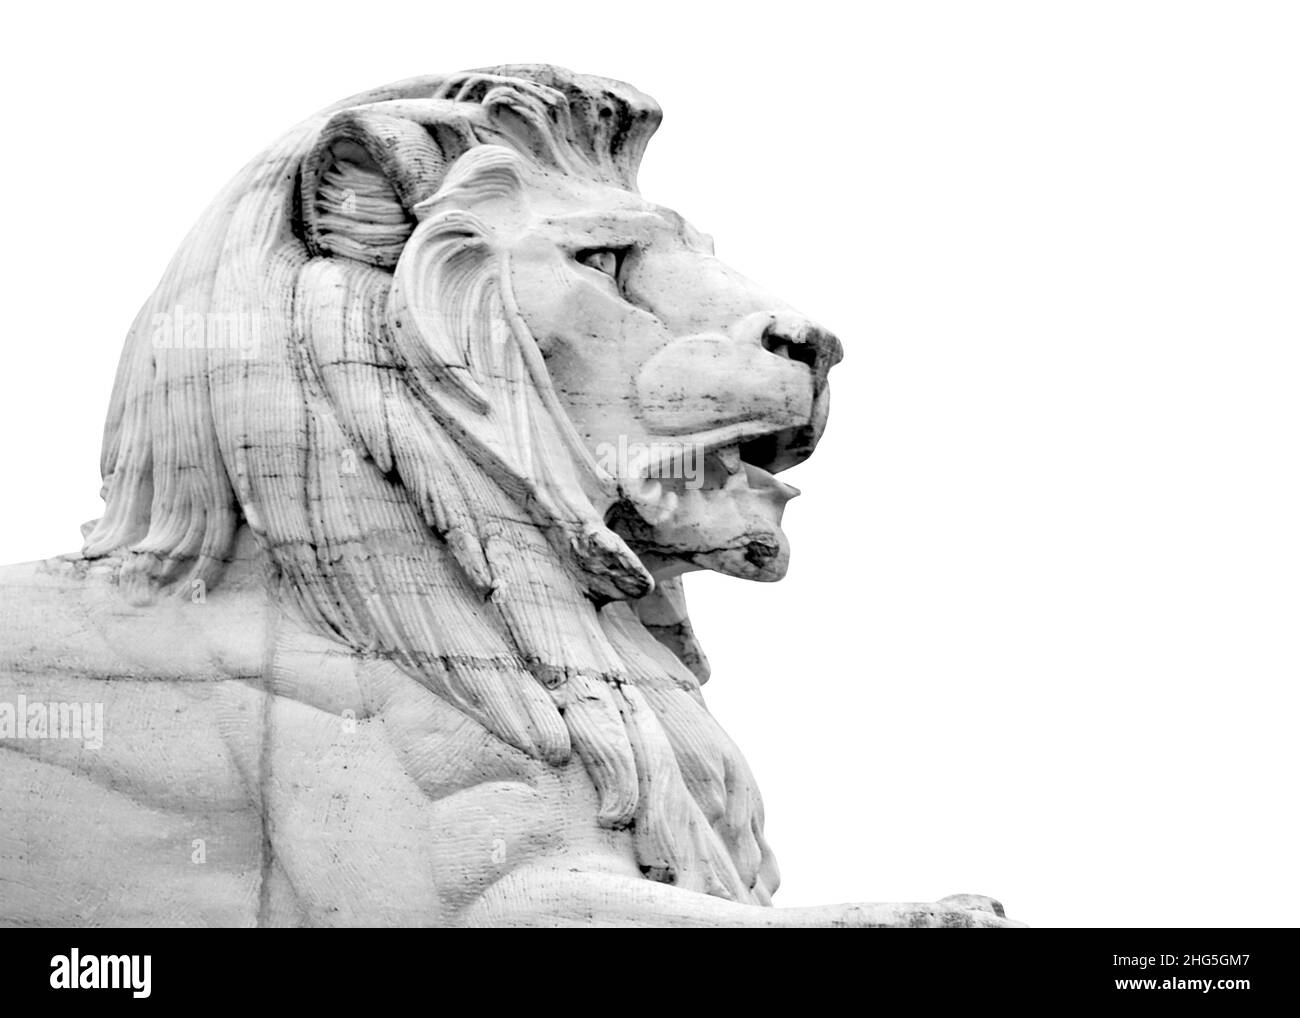 Marble sculpture of lion head isolated in white background, side view black and white picture Stock Photo